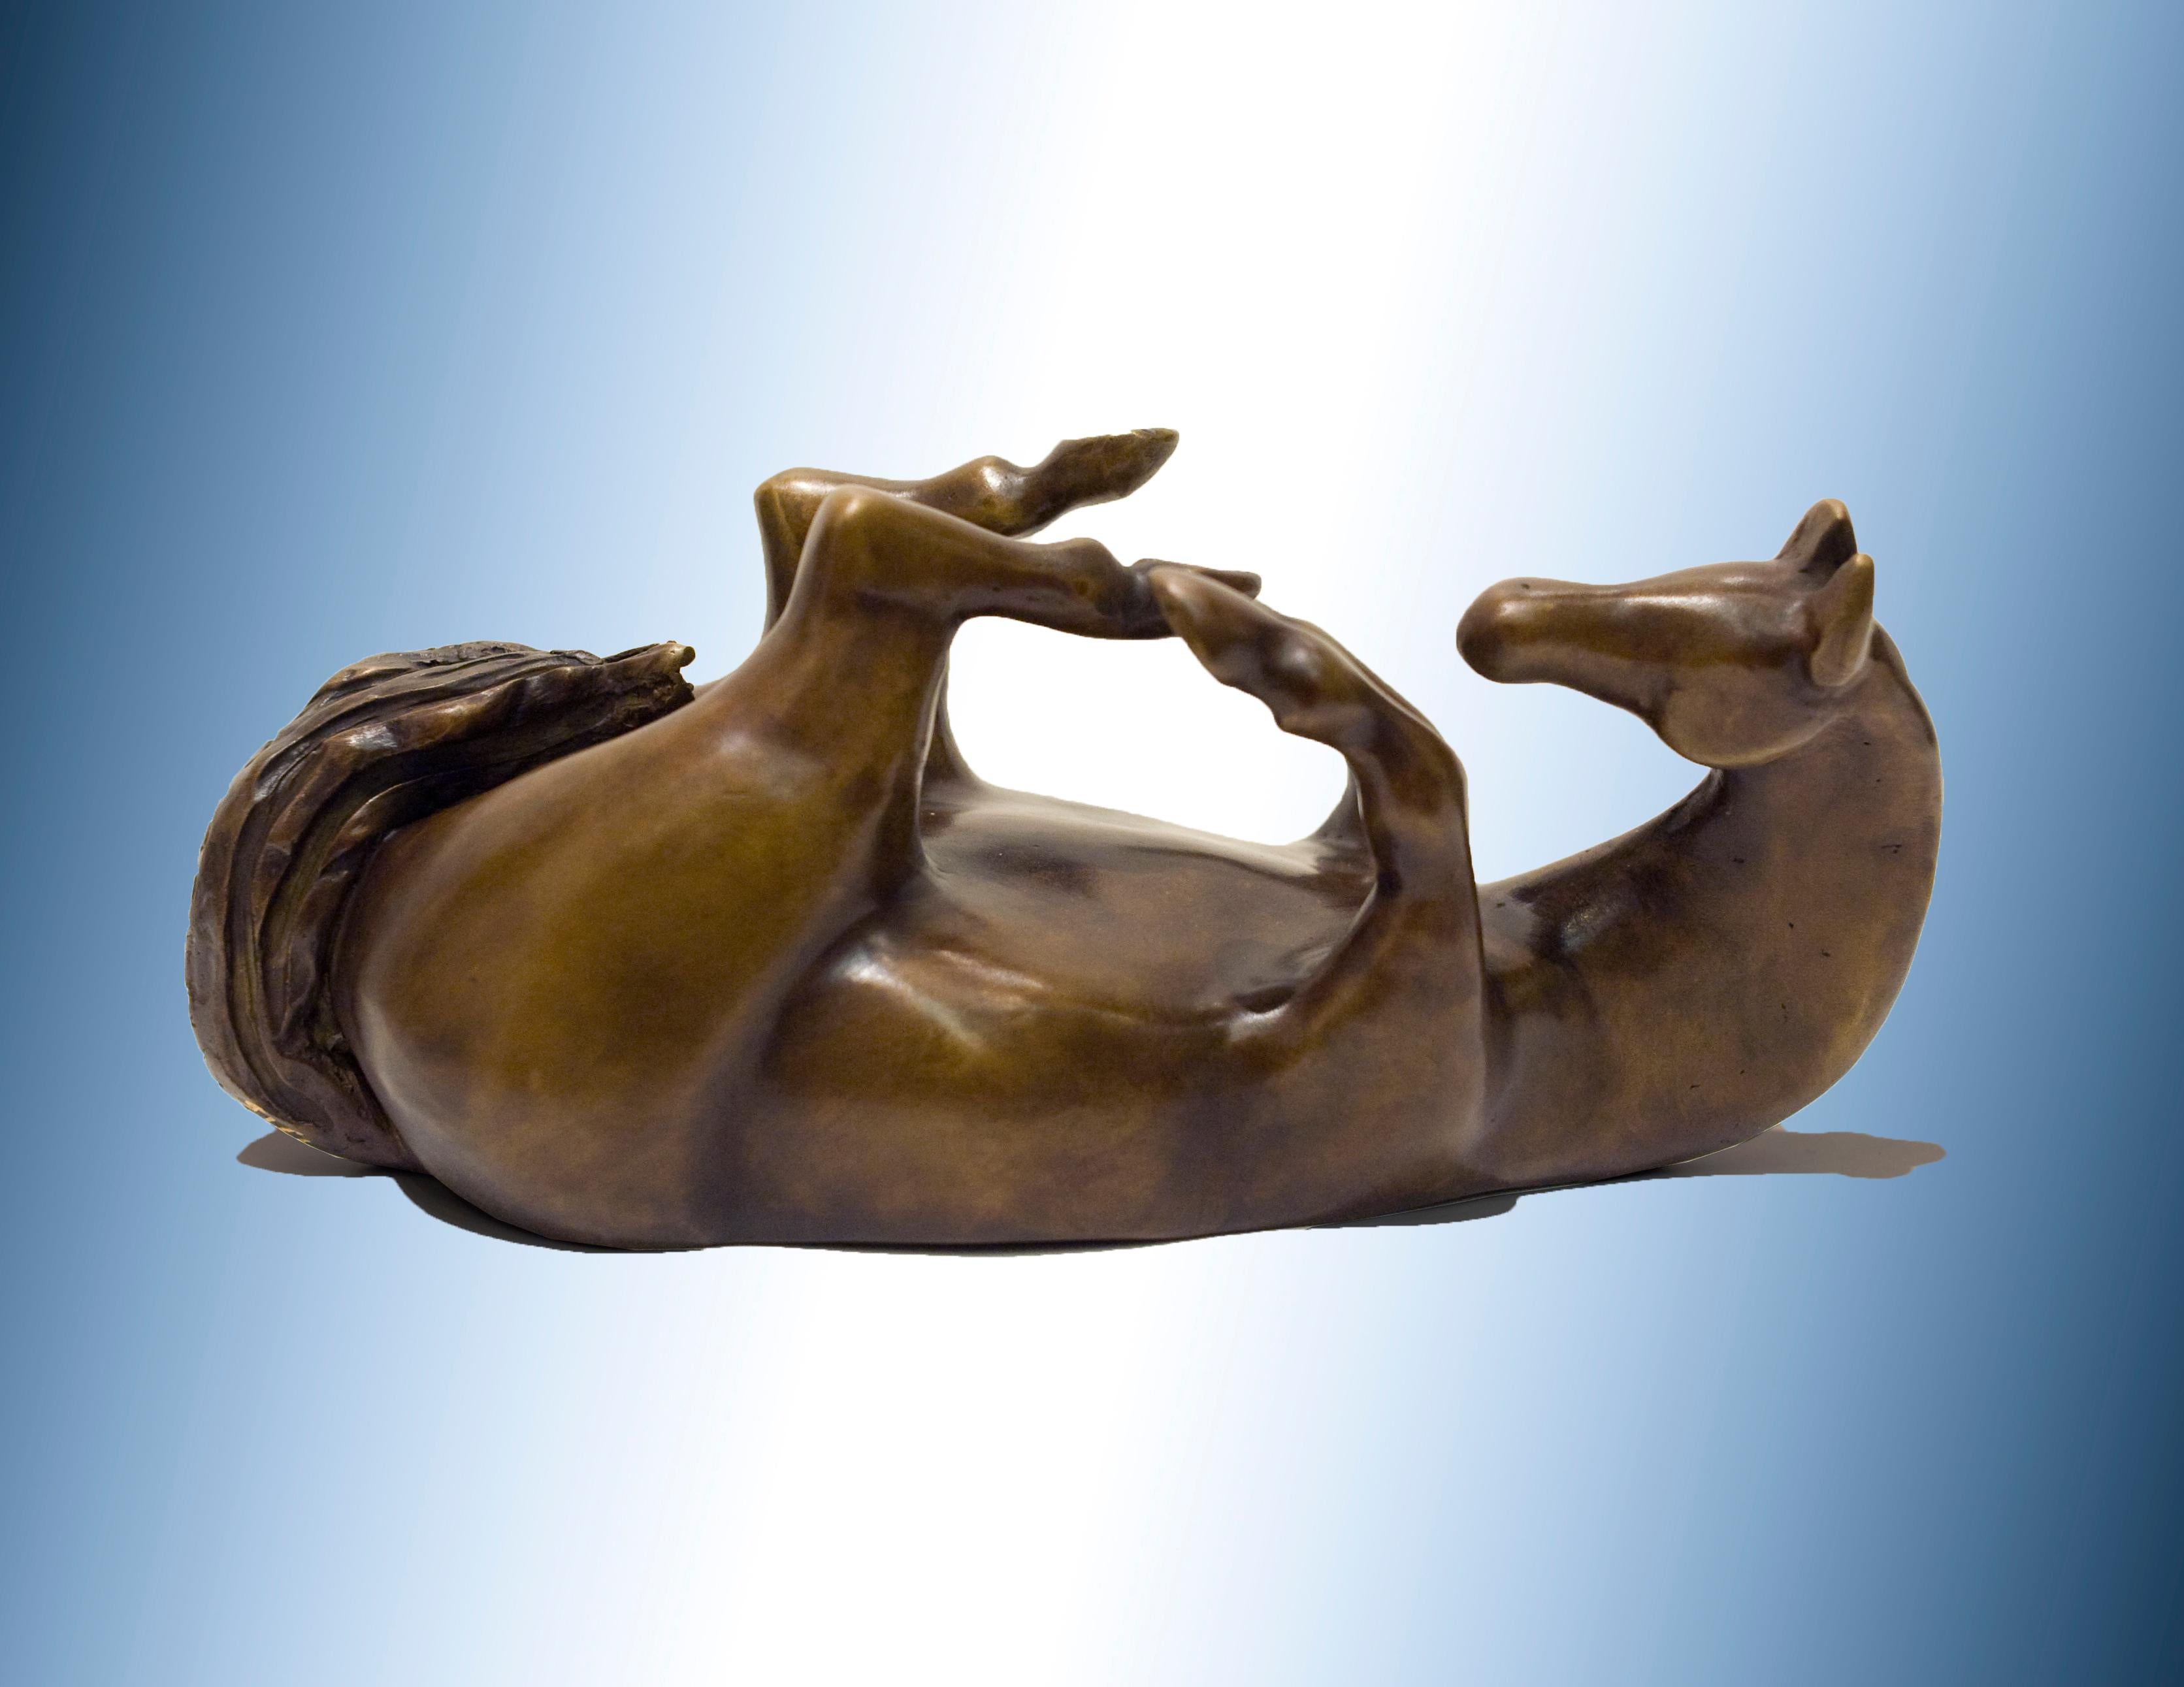 Horses: At Attention, At Play, At Rest  (set) - Gold Figurative Sculpture by Gisela Pferdekamper